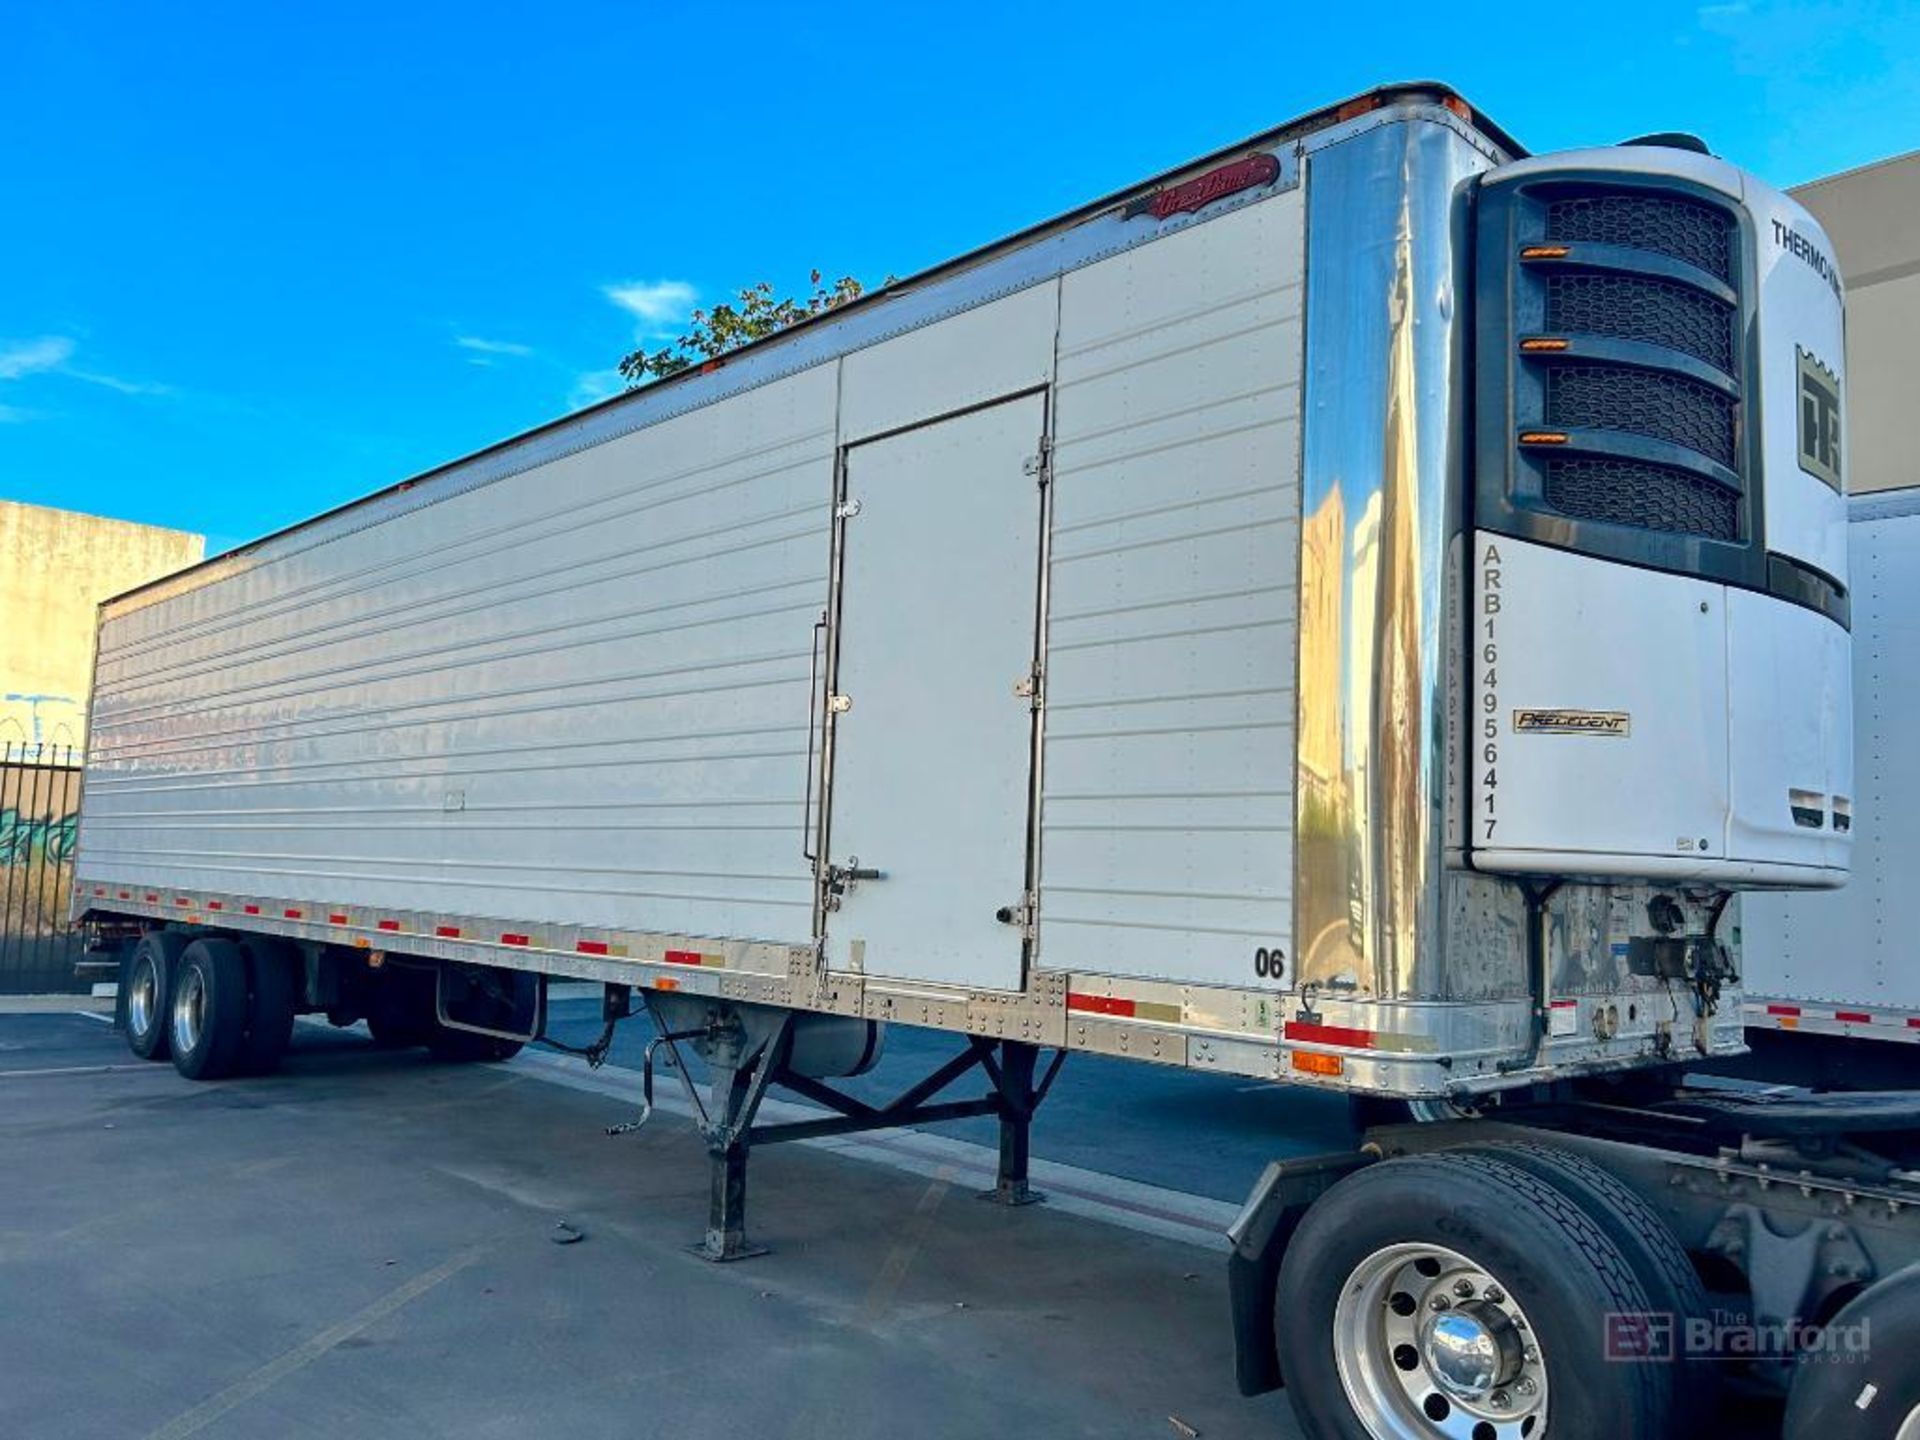 Great Dane 48' Trailer with Thermo King S-600 Refrigeration - Image 2 of 8